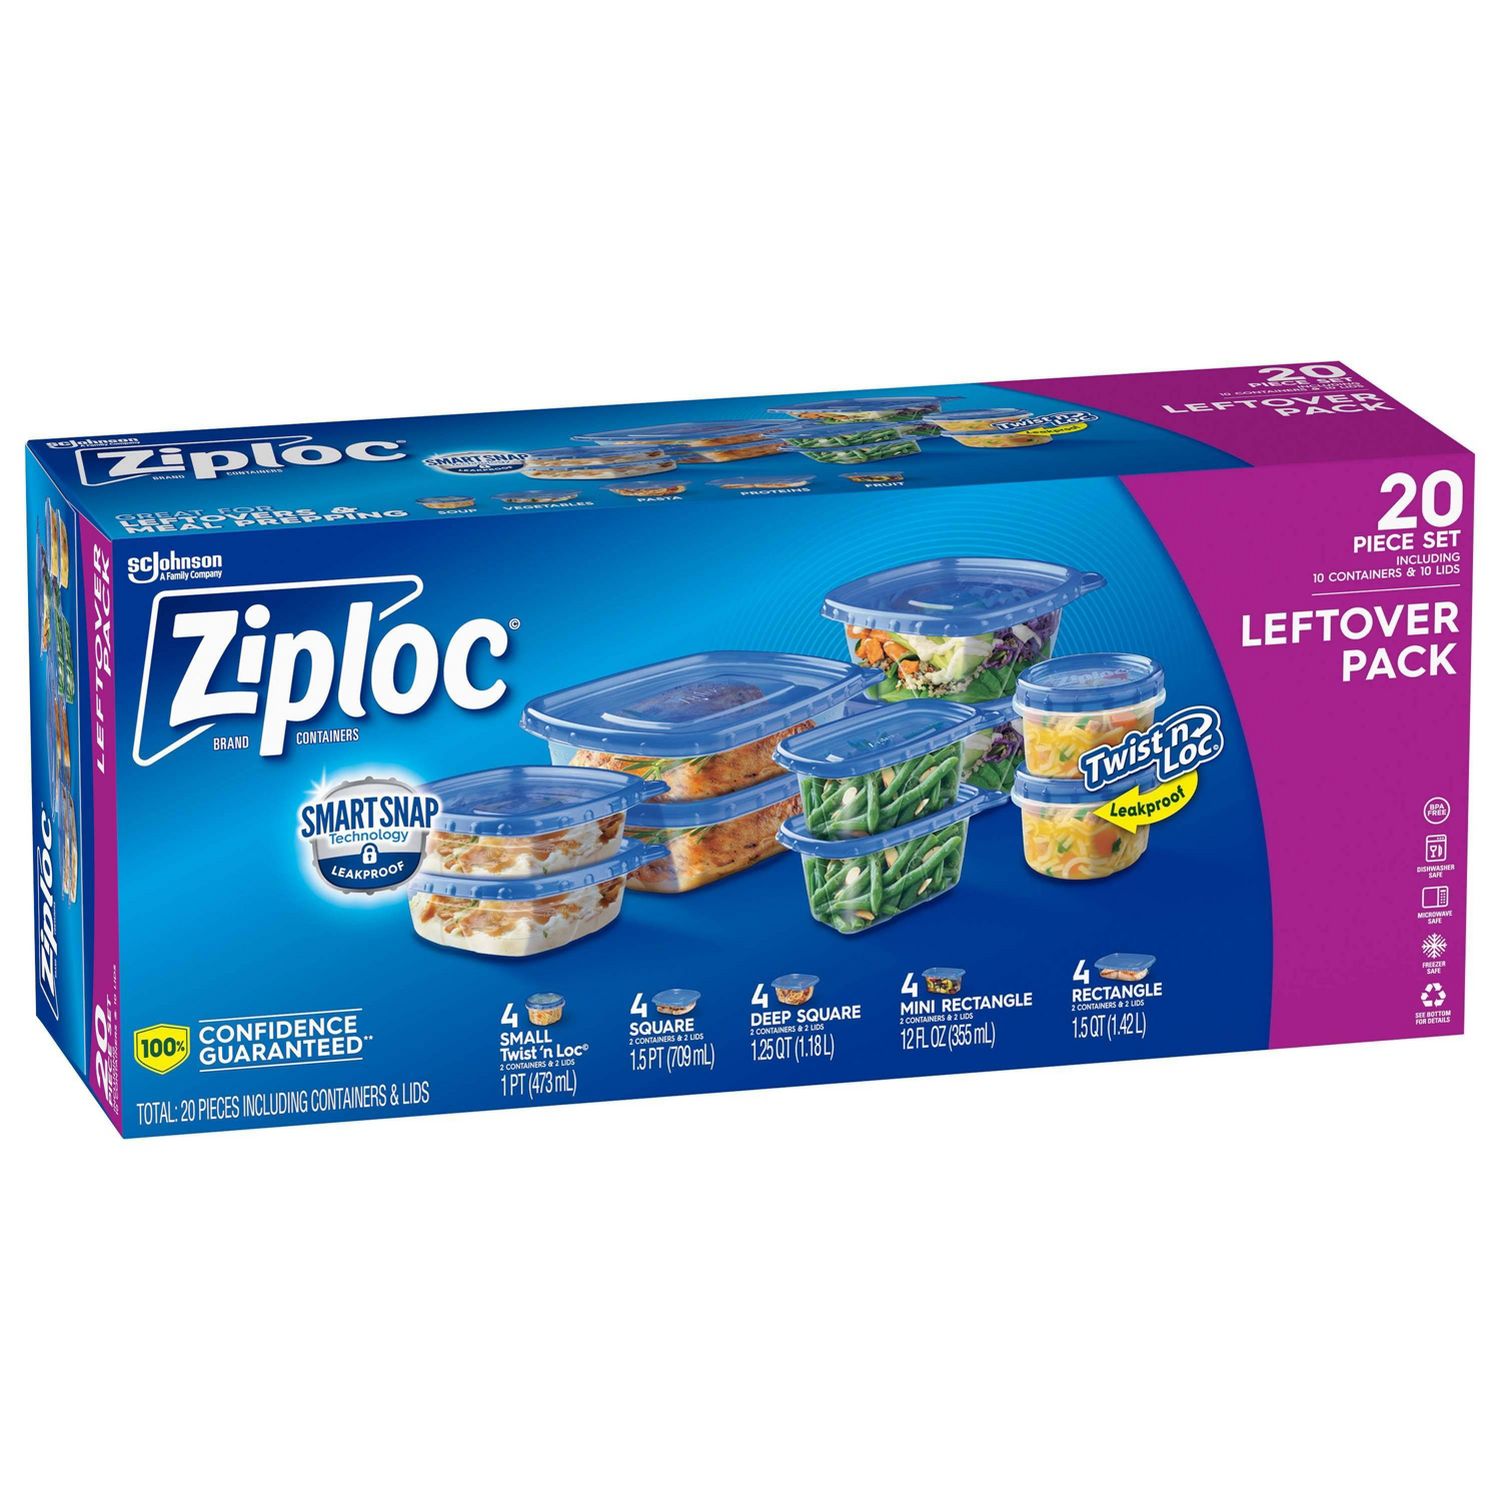 20-Piece Ziploc Leftover Pack Food Storage Containers (10-Containers & 10-Lids) $6.34 + Free Shipping on $35+ or Free Store P/U at Target